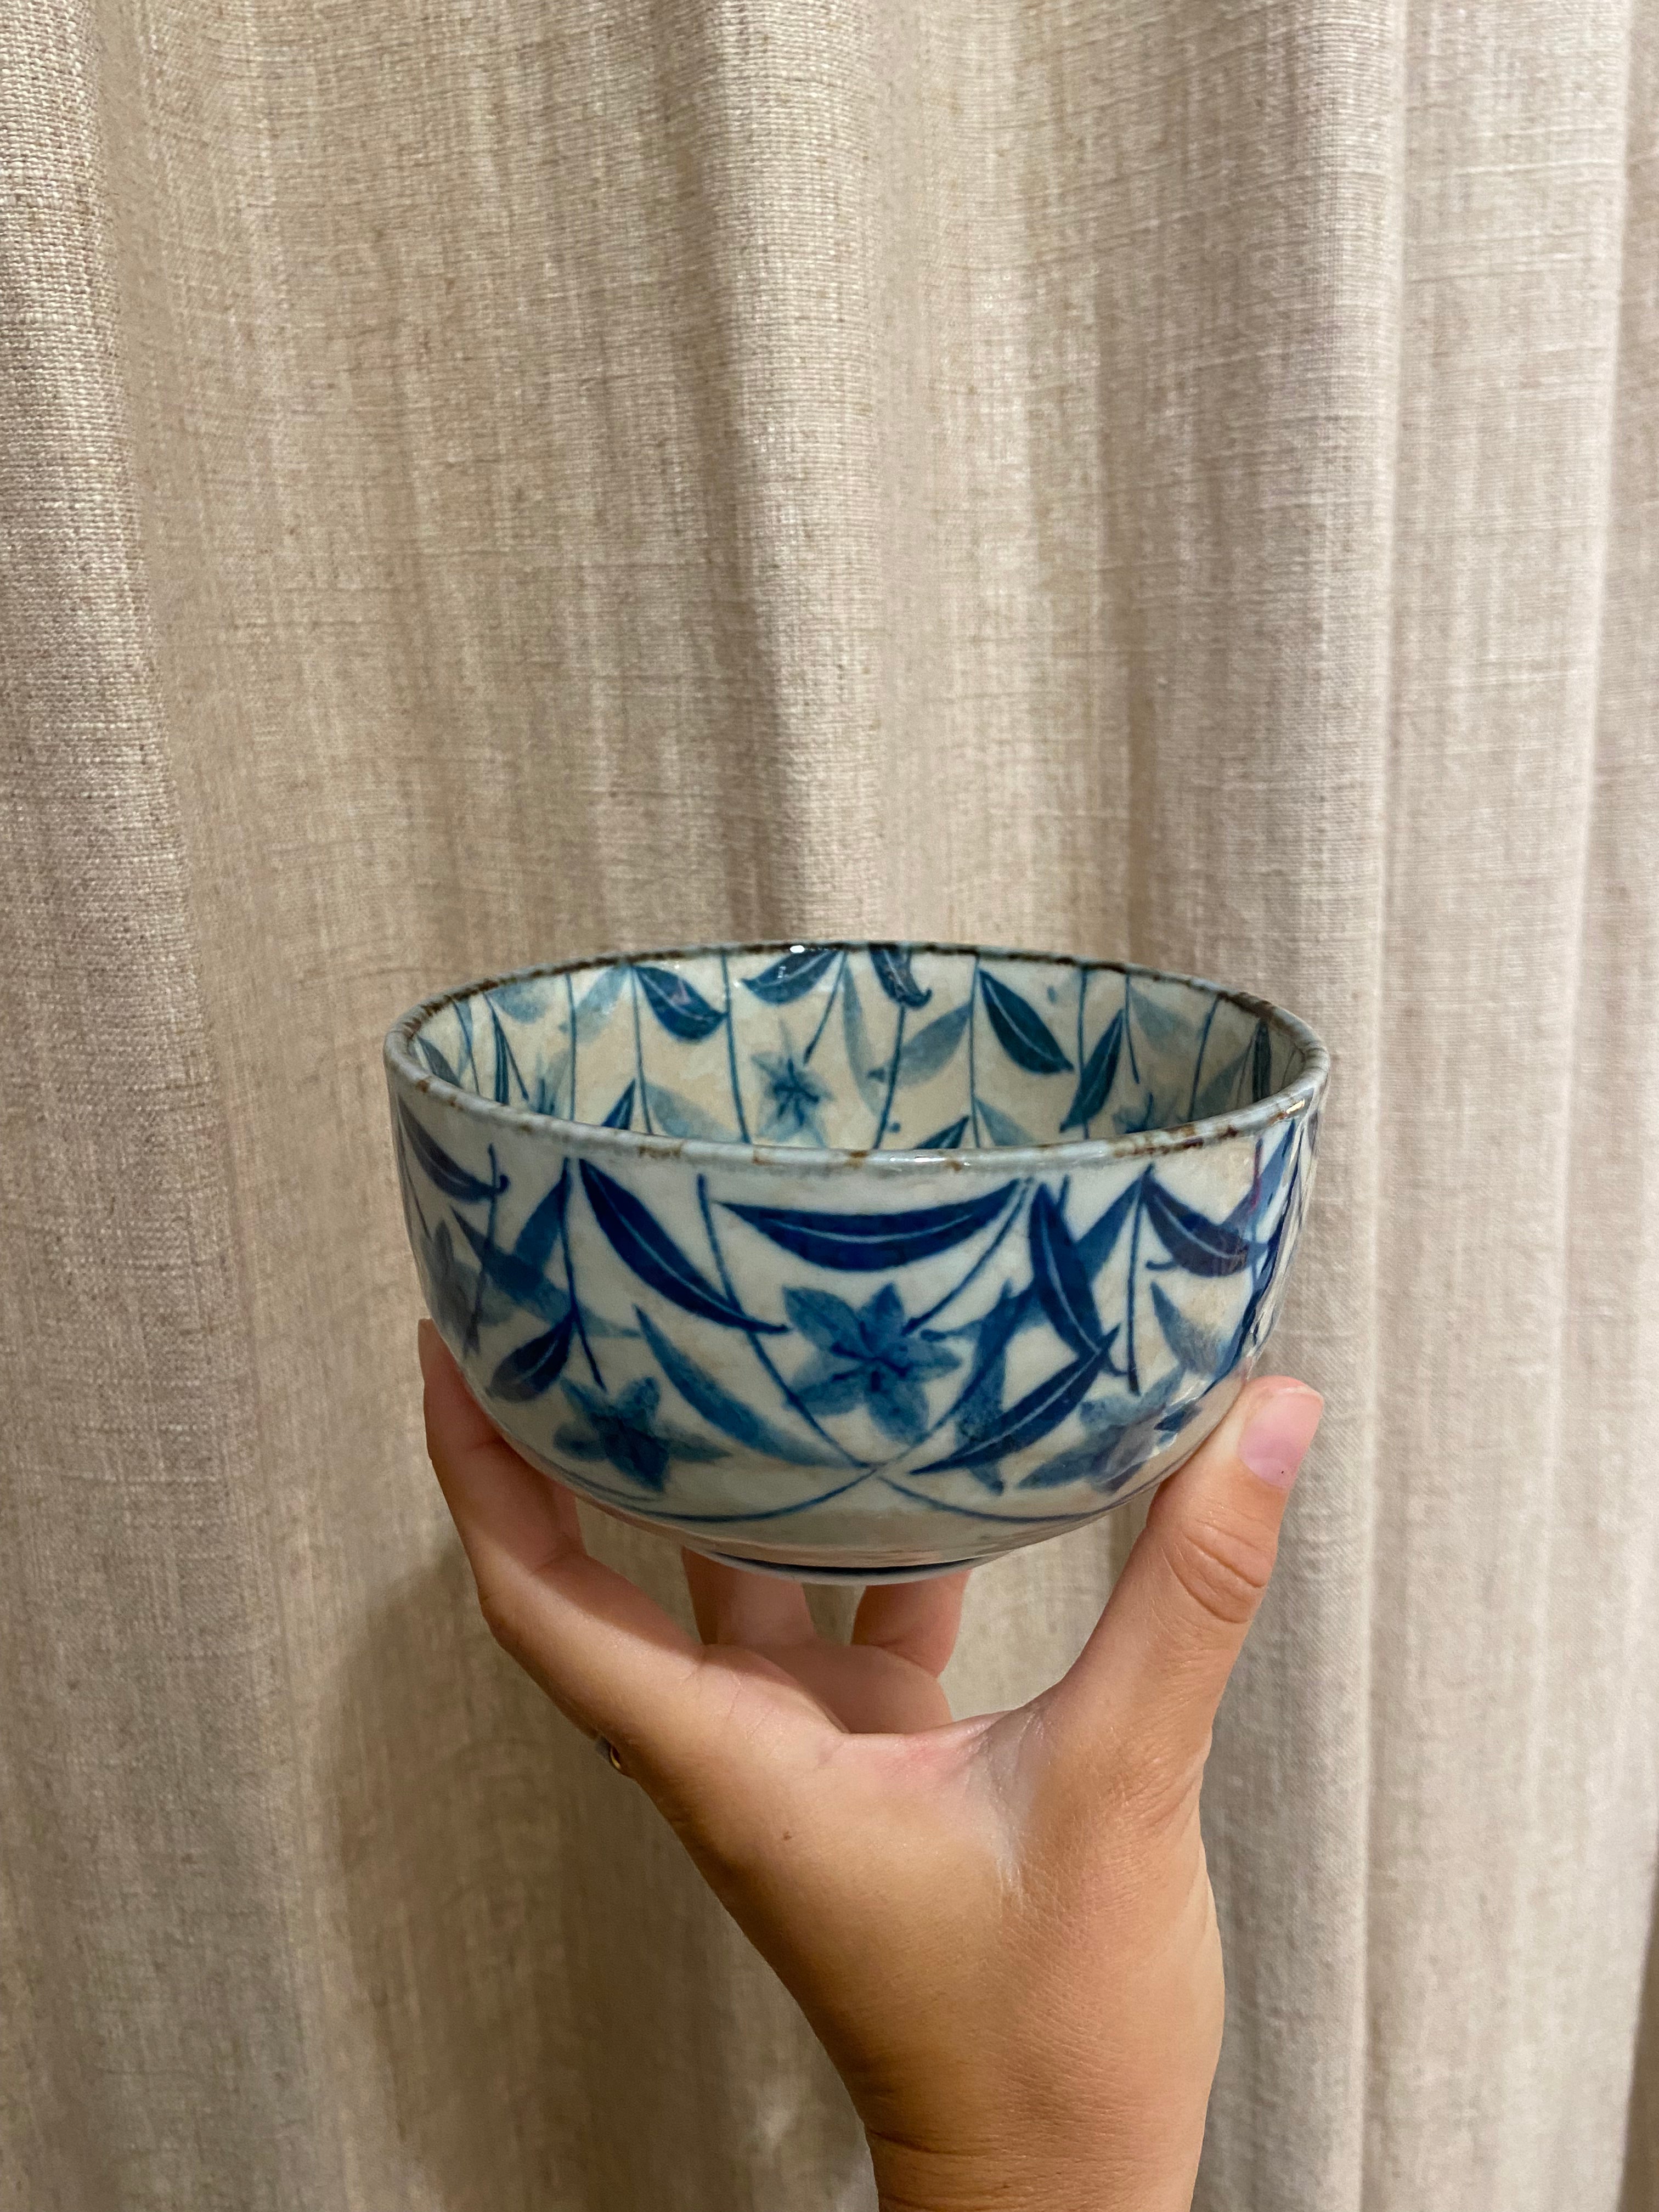 Matcha cup/ceramic bowl with blue floral motif